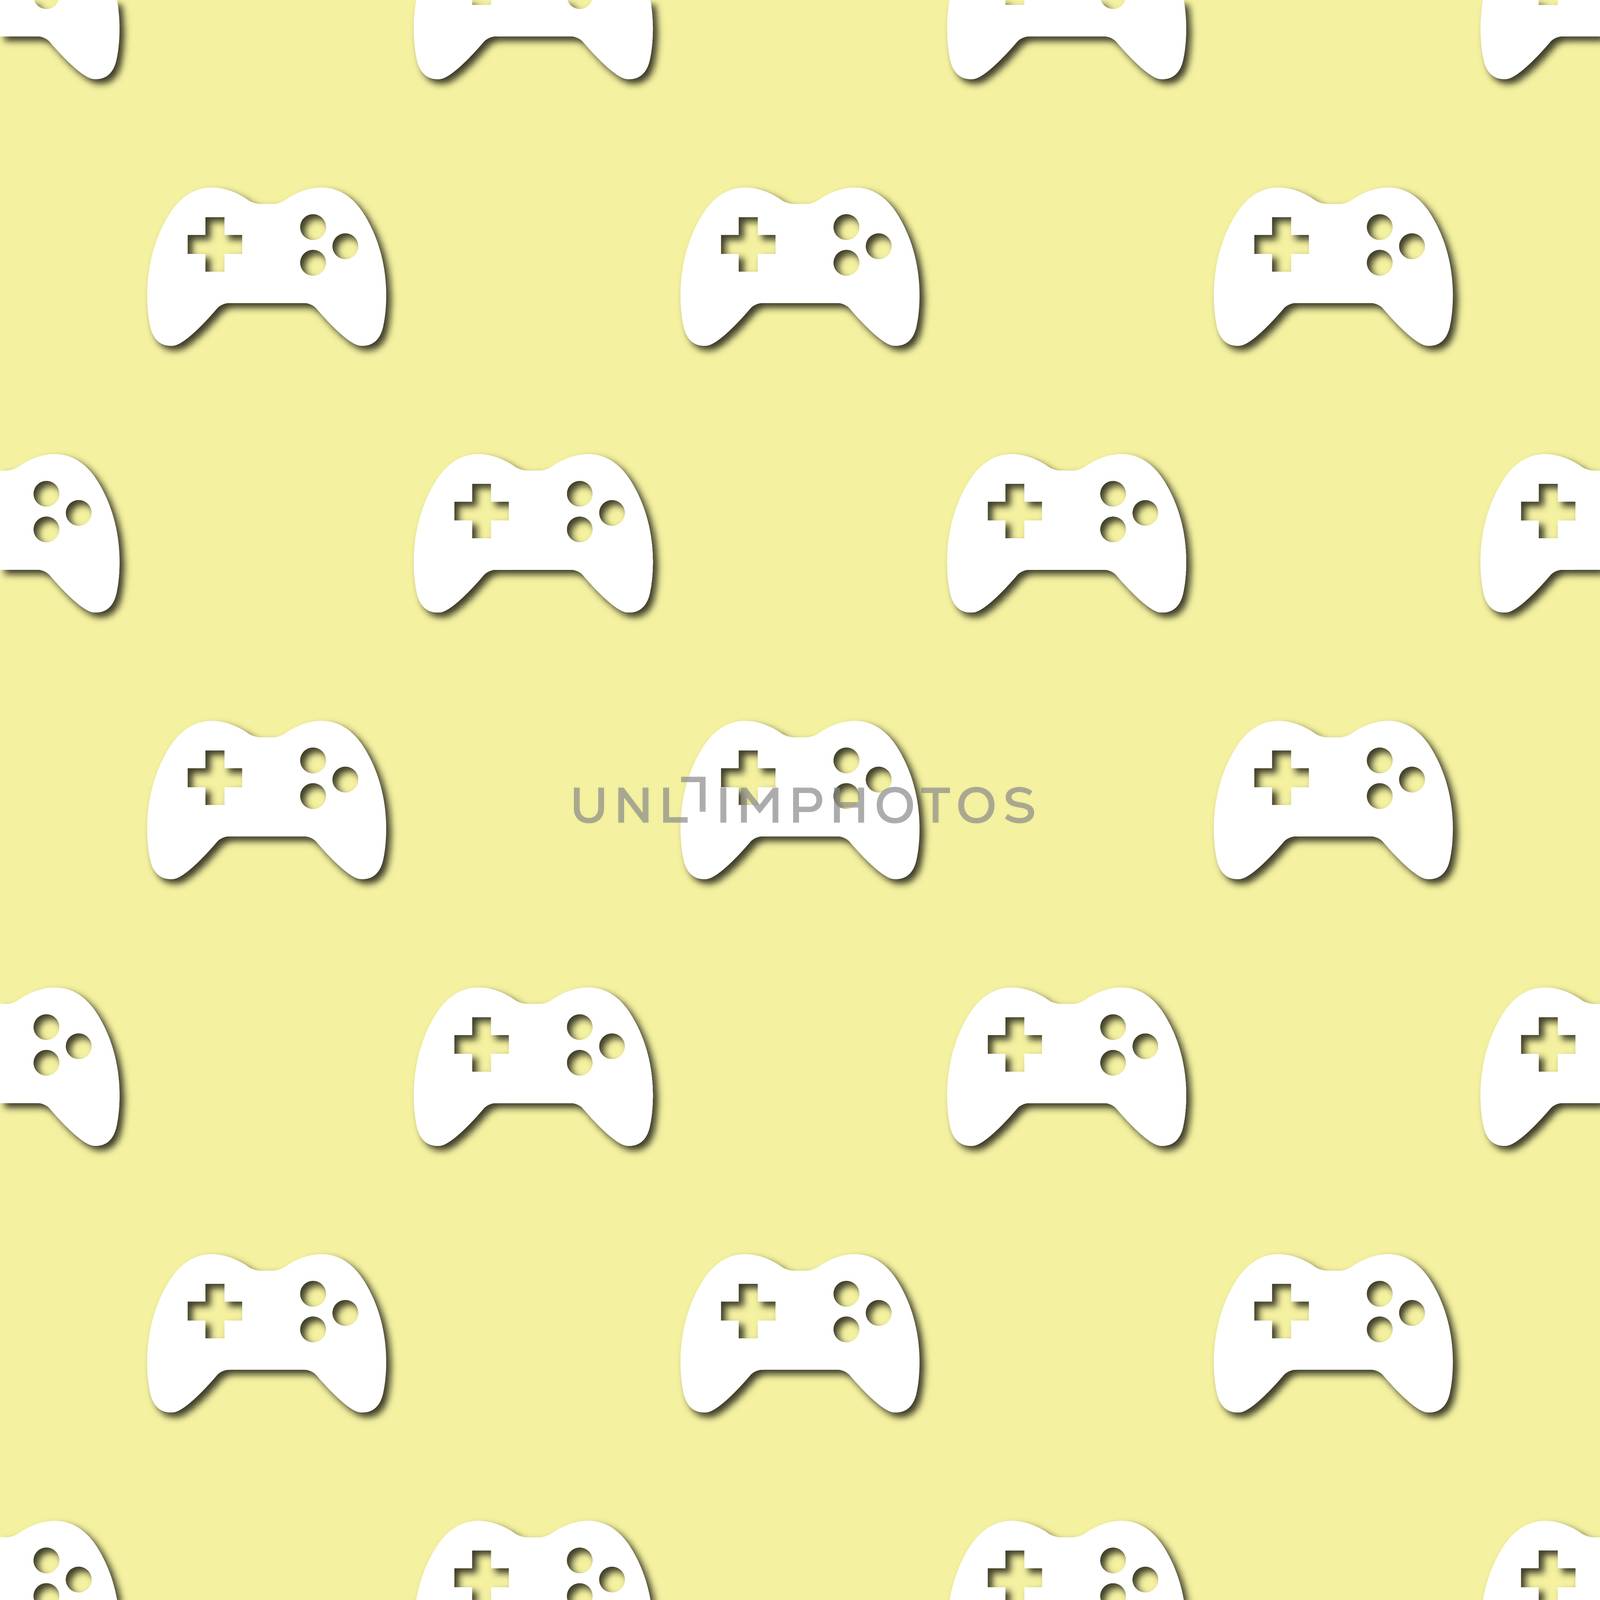 White game consoles icon on pale green background, seamless pattern. Paper cut style with drop shadows and highlights.